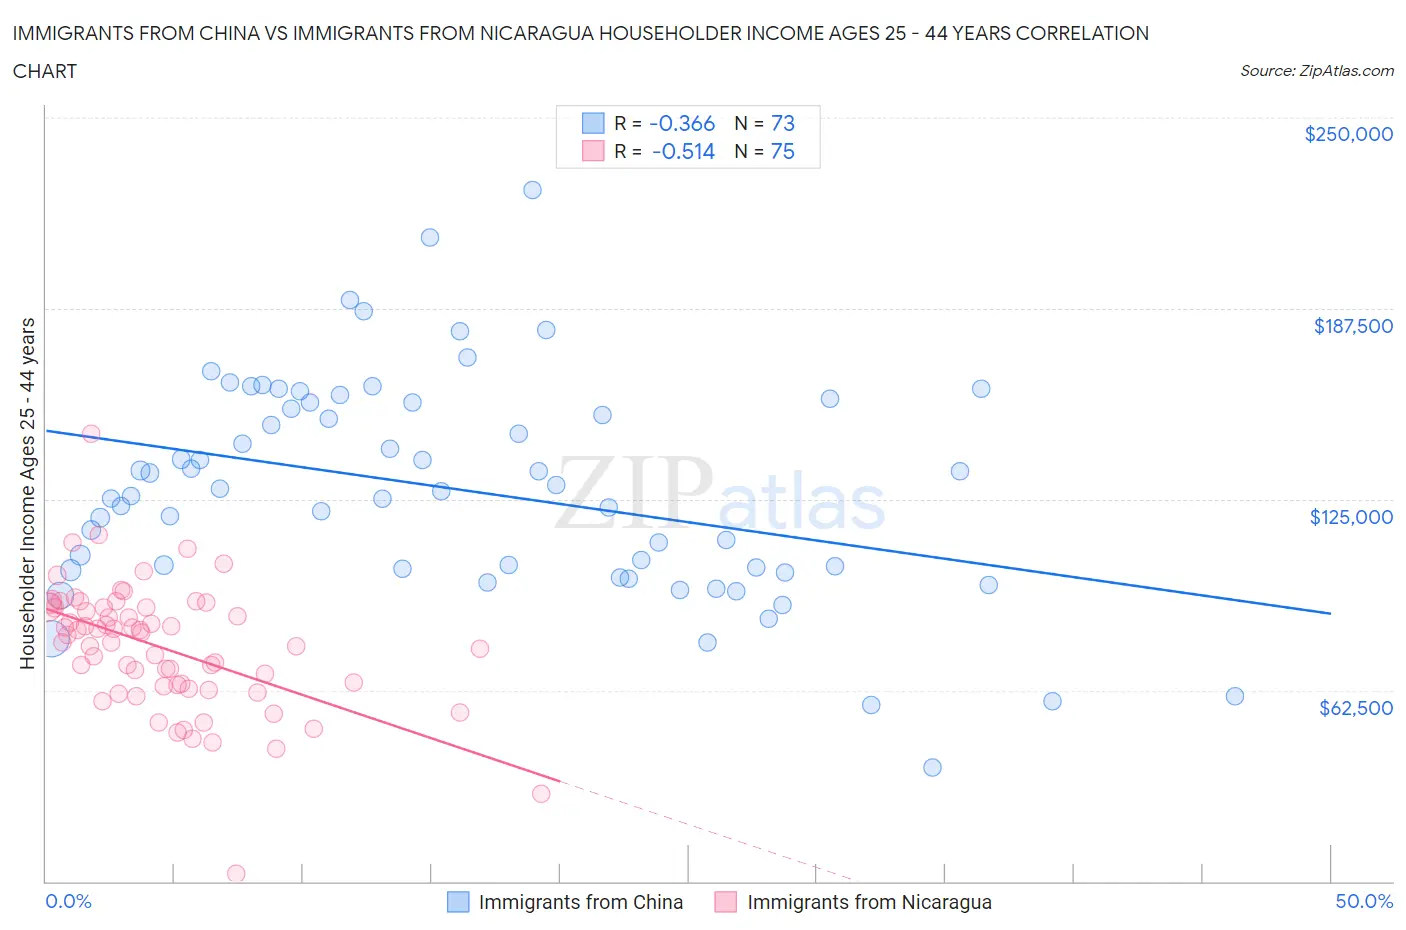 Immigrants from China vs Immigrants from Nicaragua Householder Income Ages 25 - 44 years